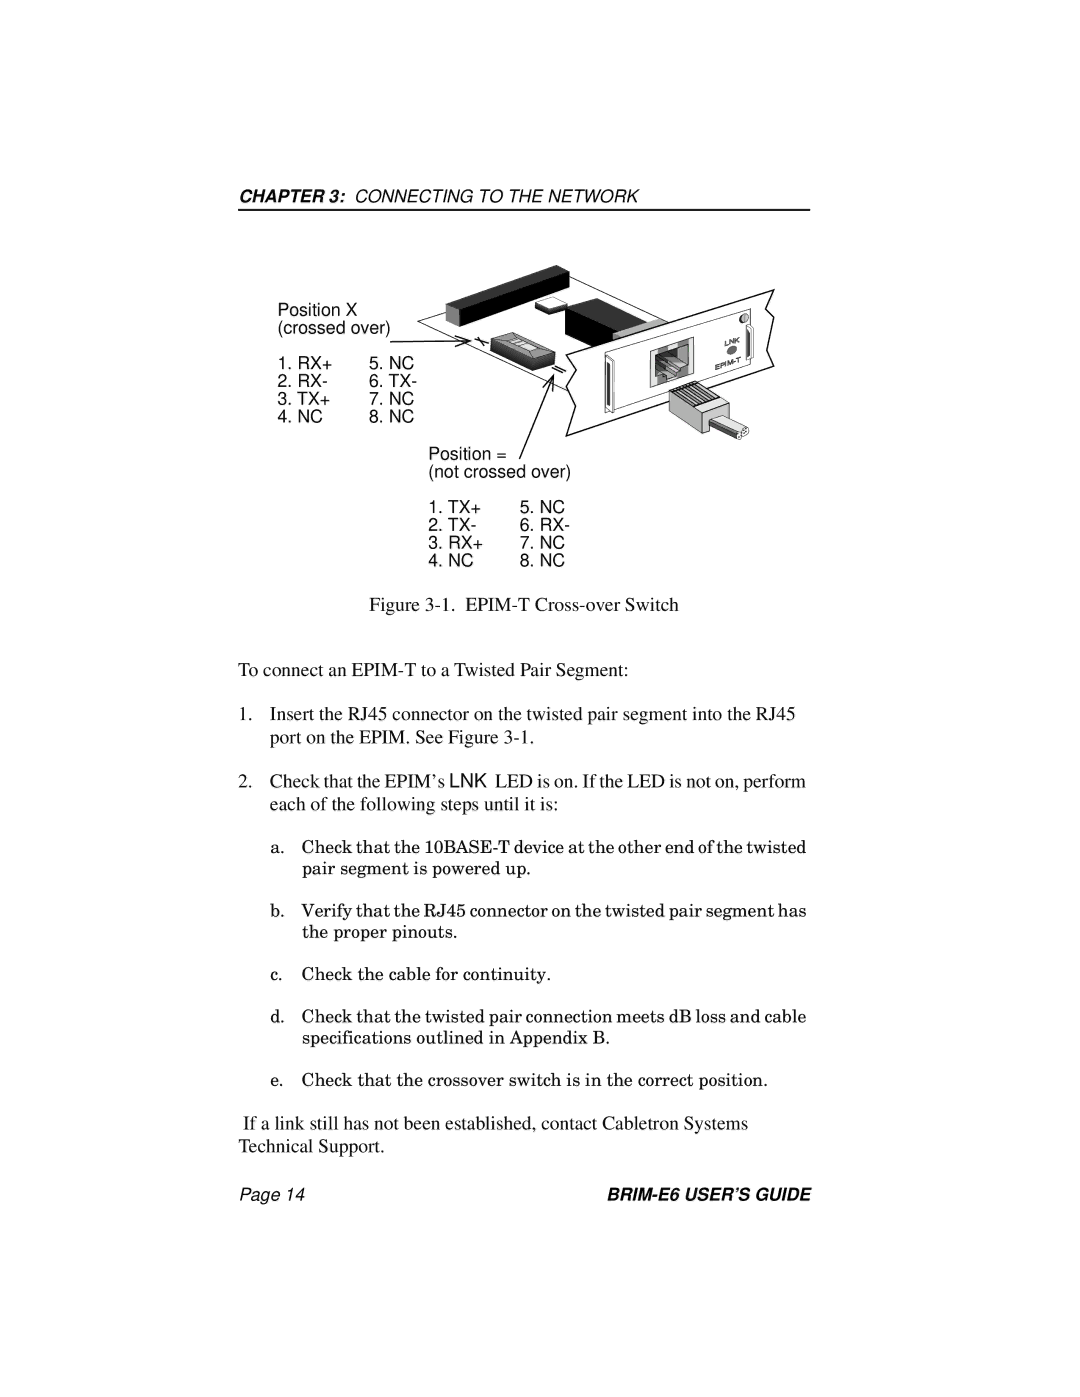 Enterasys Networks BRIM-E6 manual Connecting to the Network 